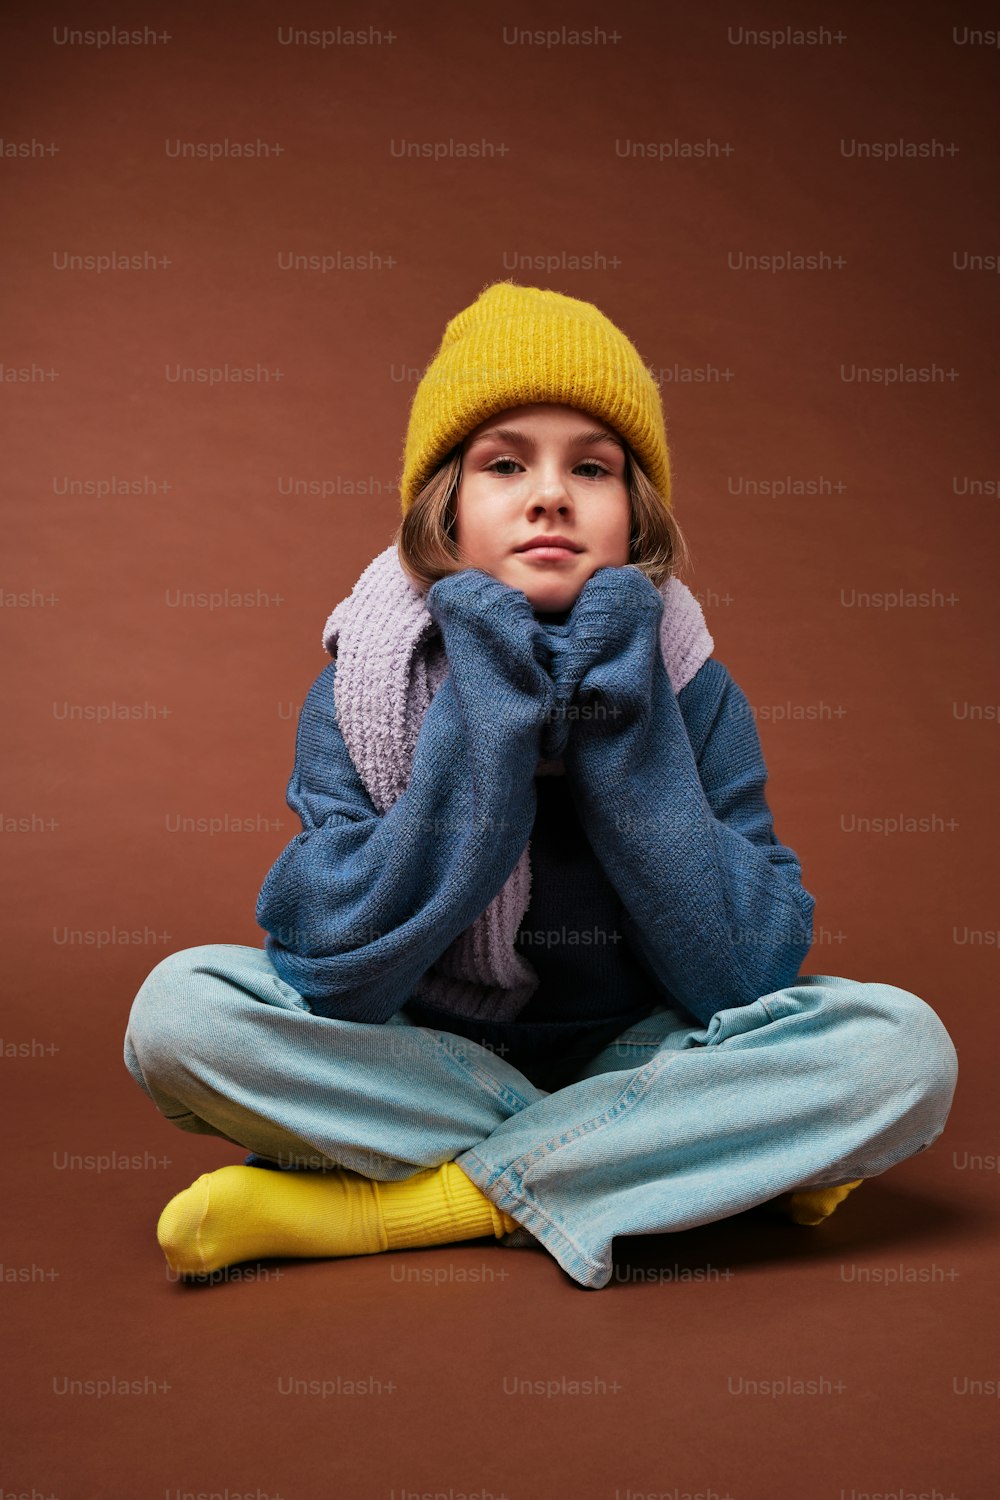 a little girl sitting on the floor wearing a yellow hat